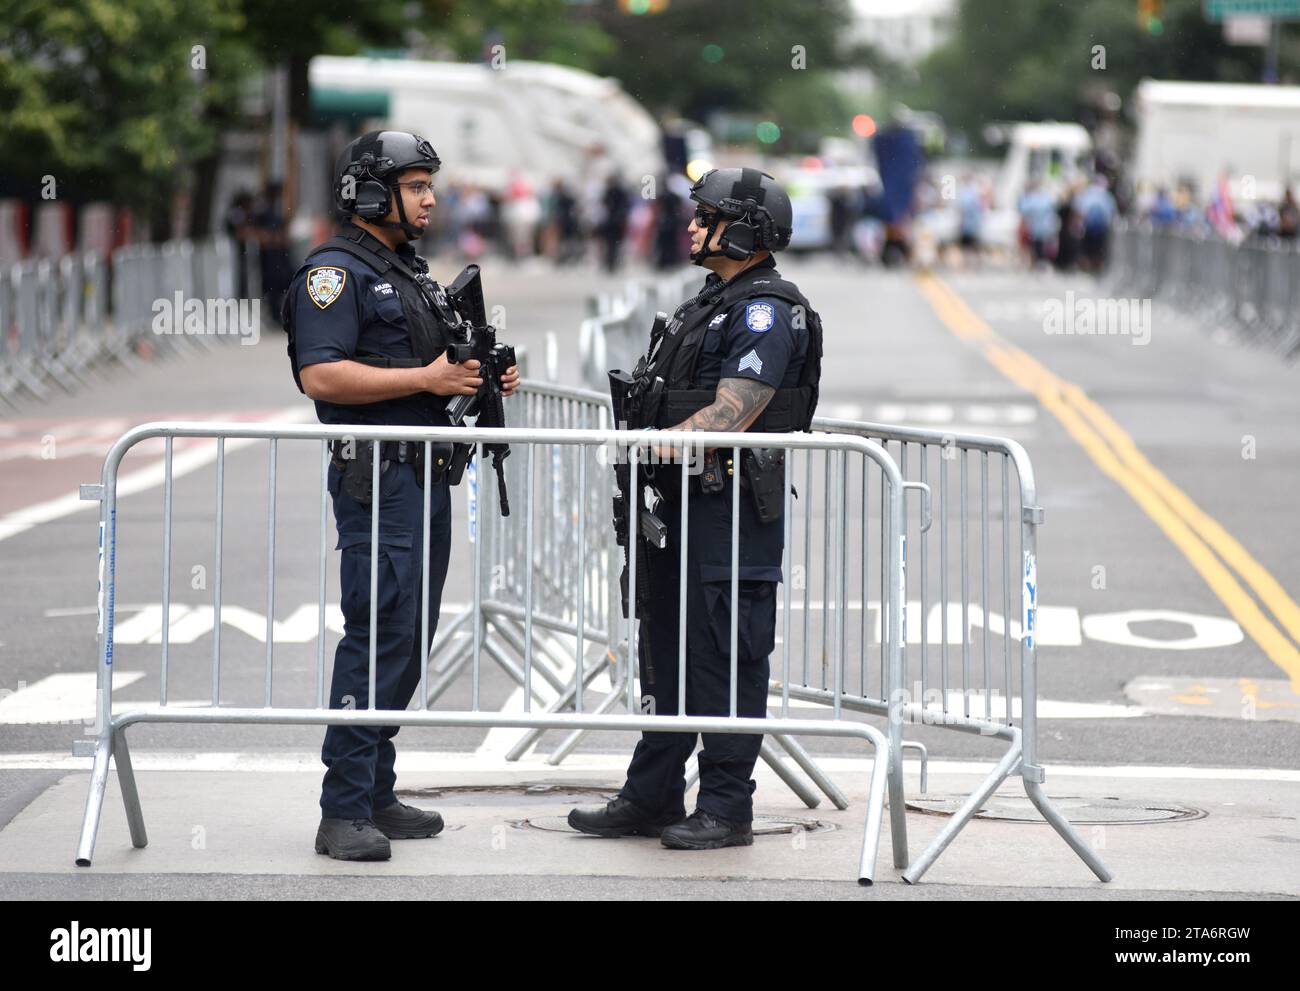 NEW YORK, USA - June 10, 2018: The New York City Police Department (NYPD) police officers providing security on the streets of Manhattan. Stock Photo